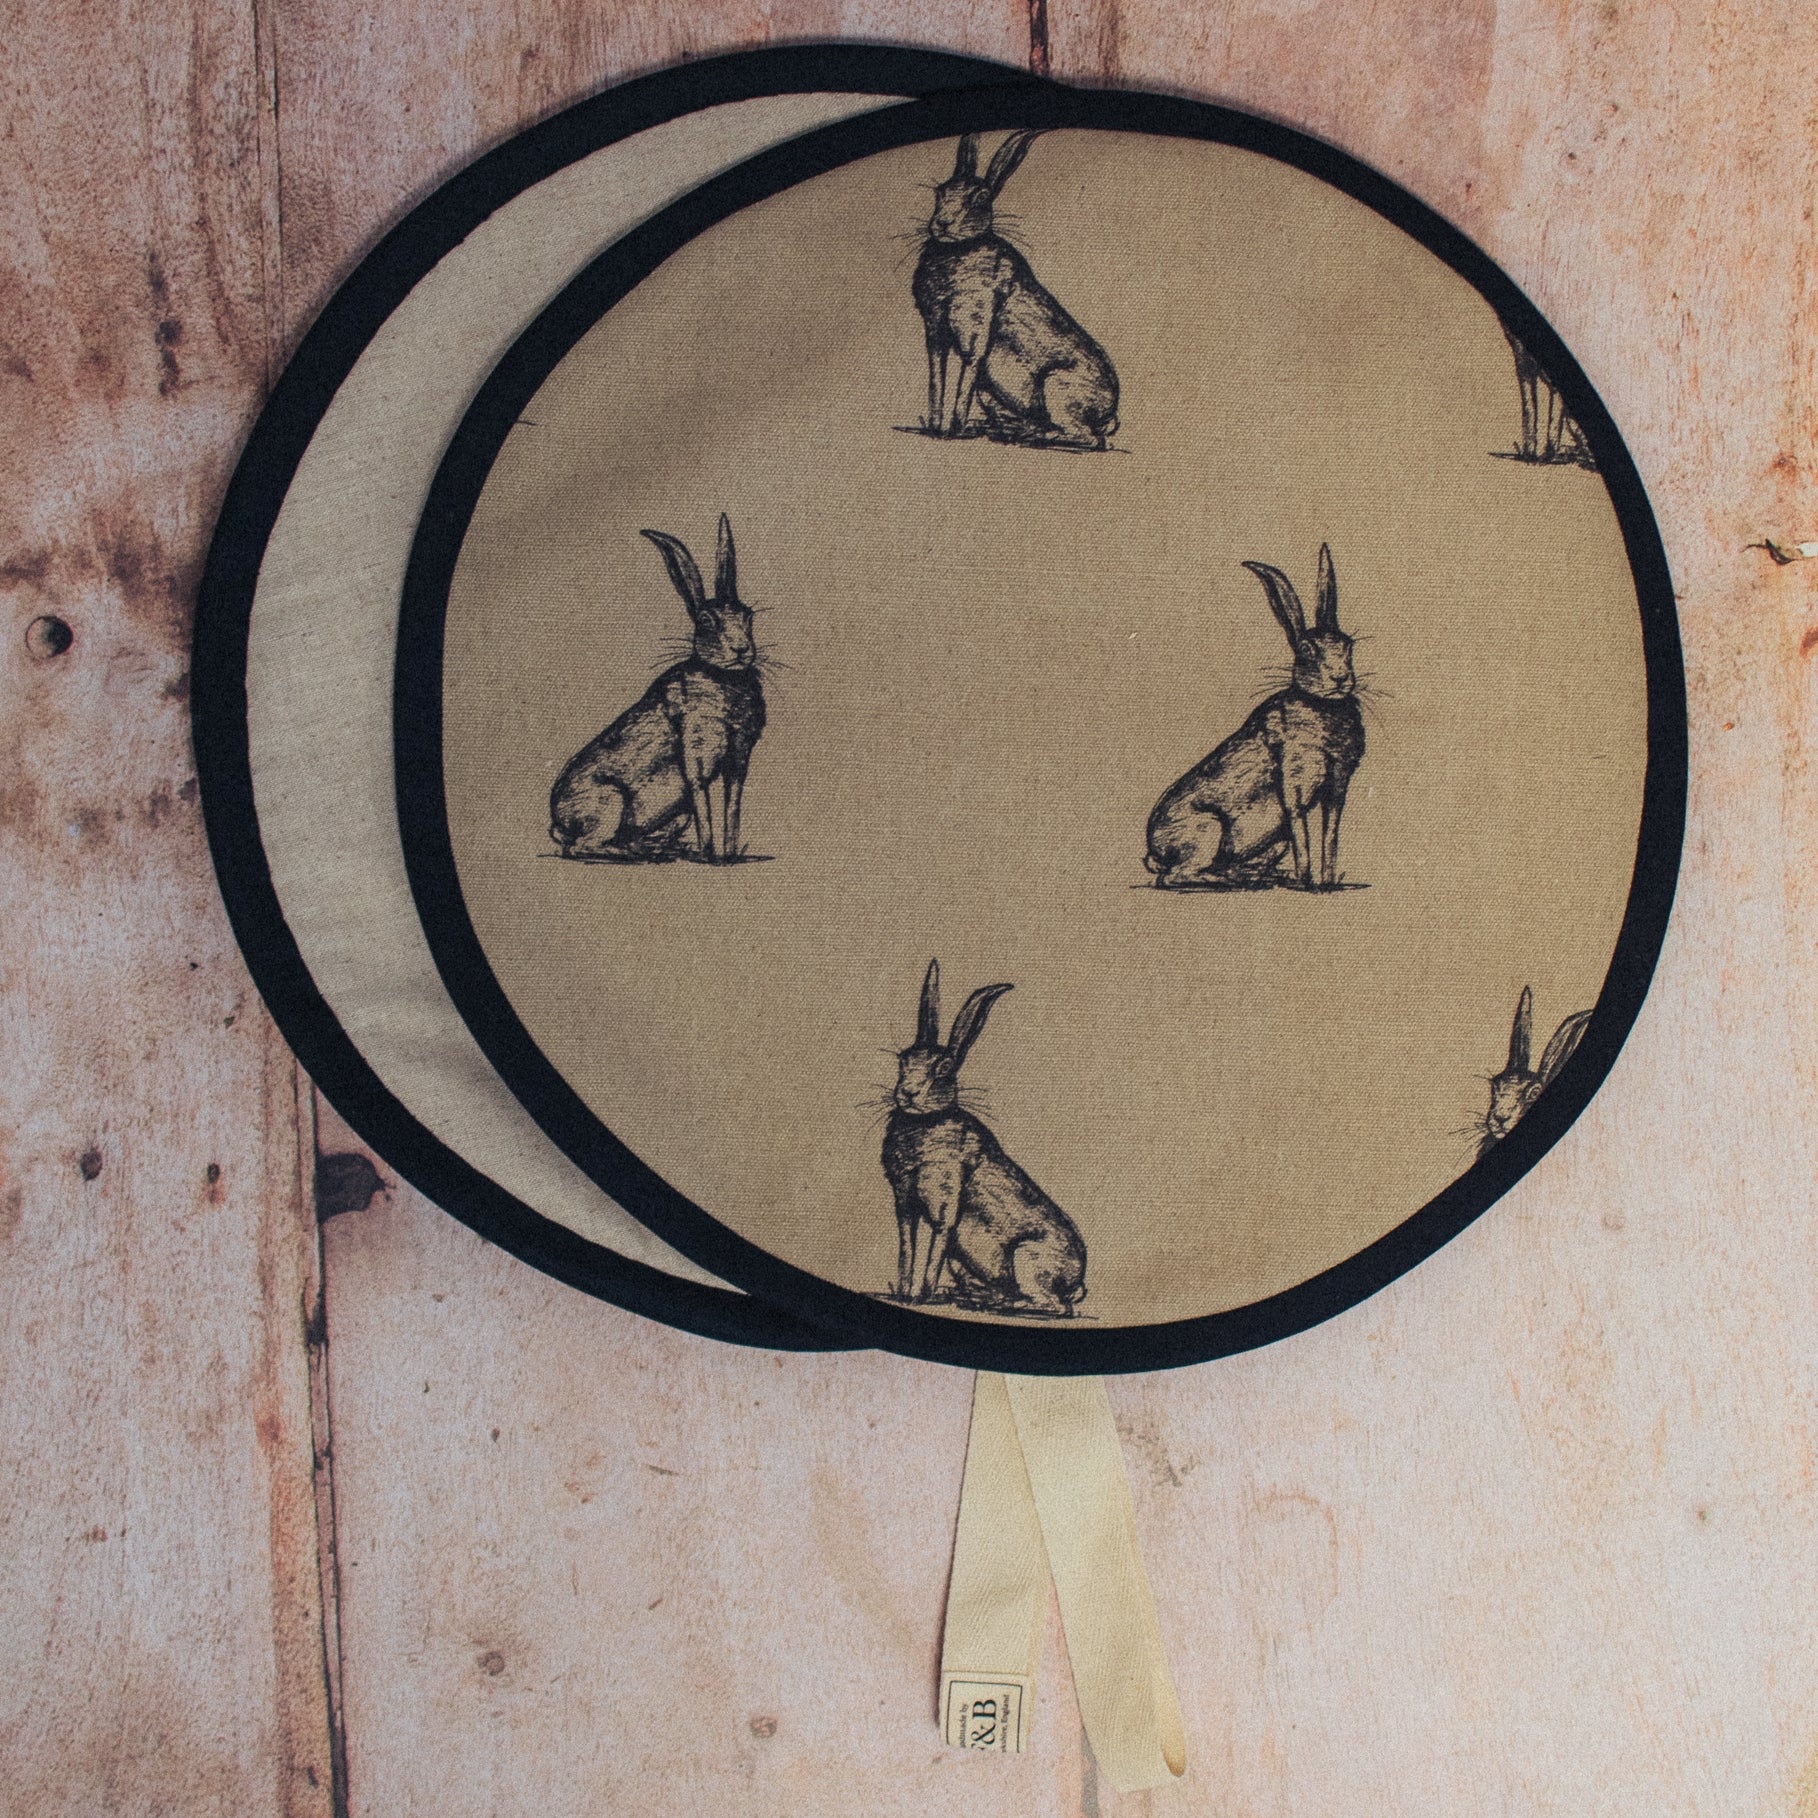 Hare Illustration Print on Linen fabric with Black binding photographed against light wood background